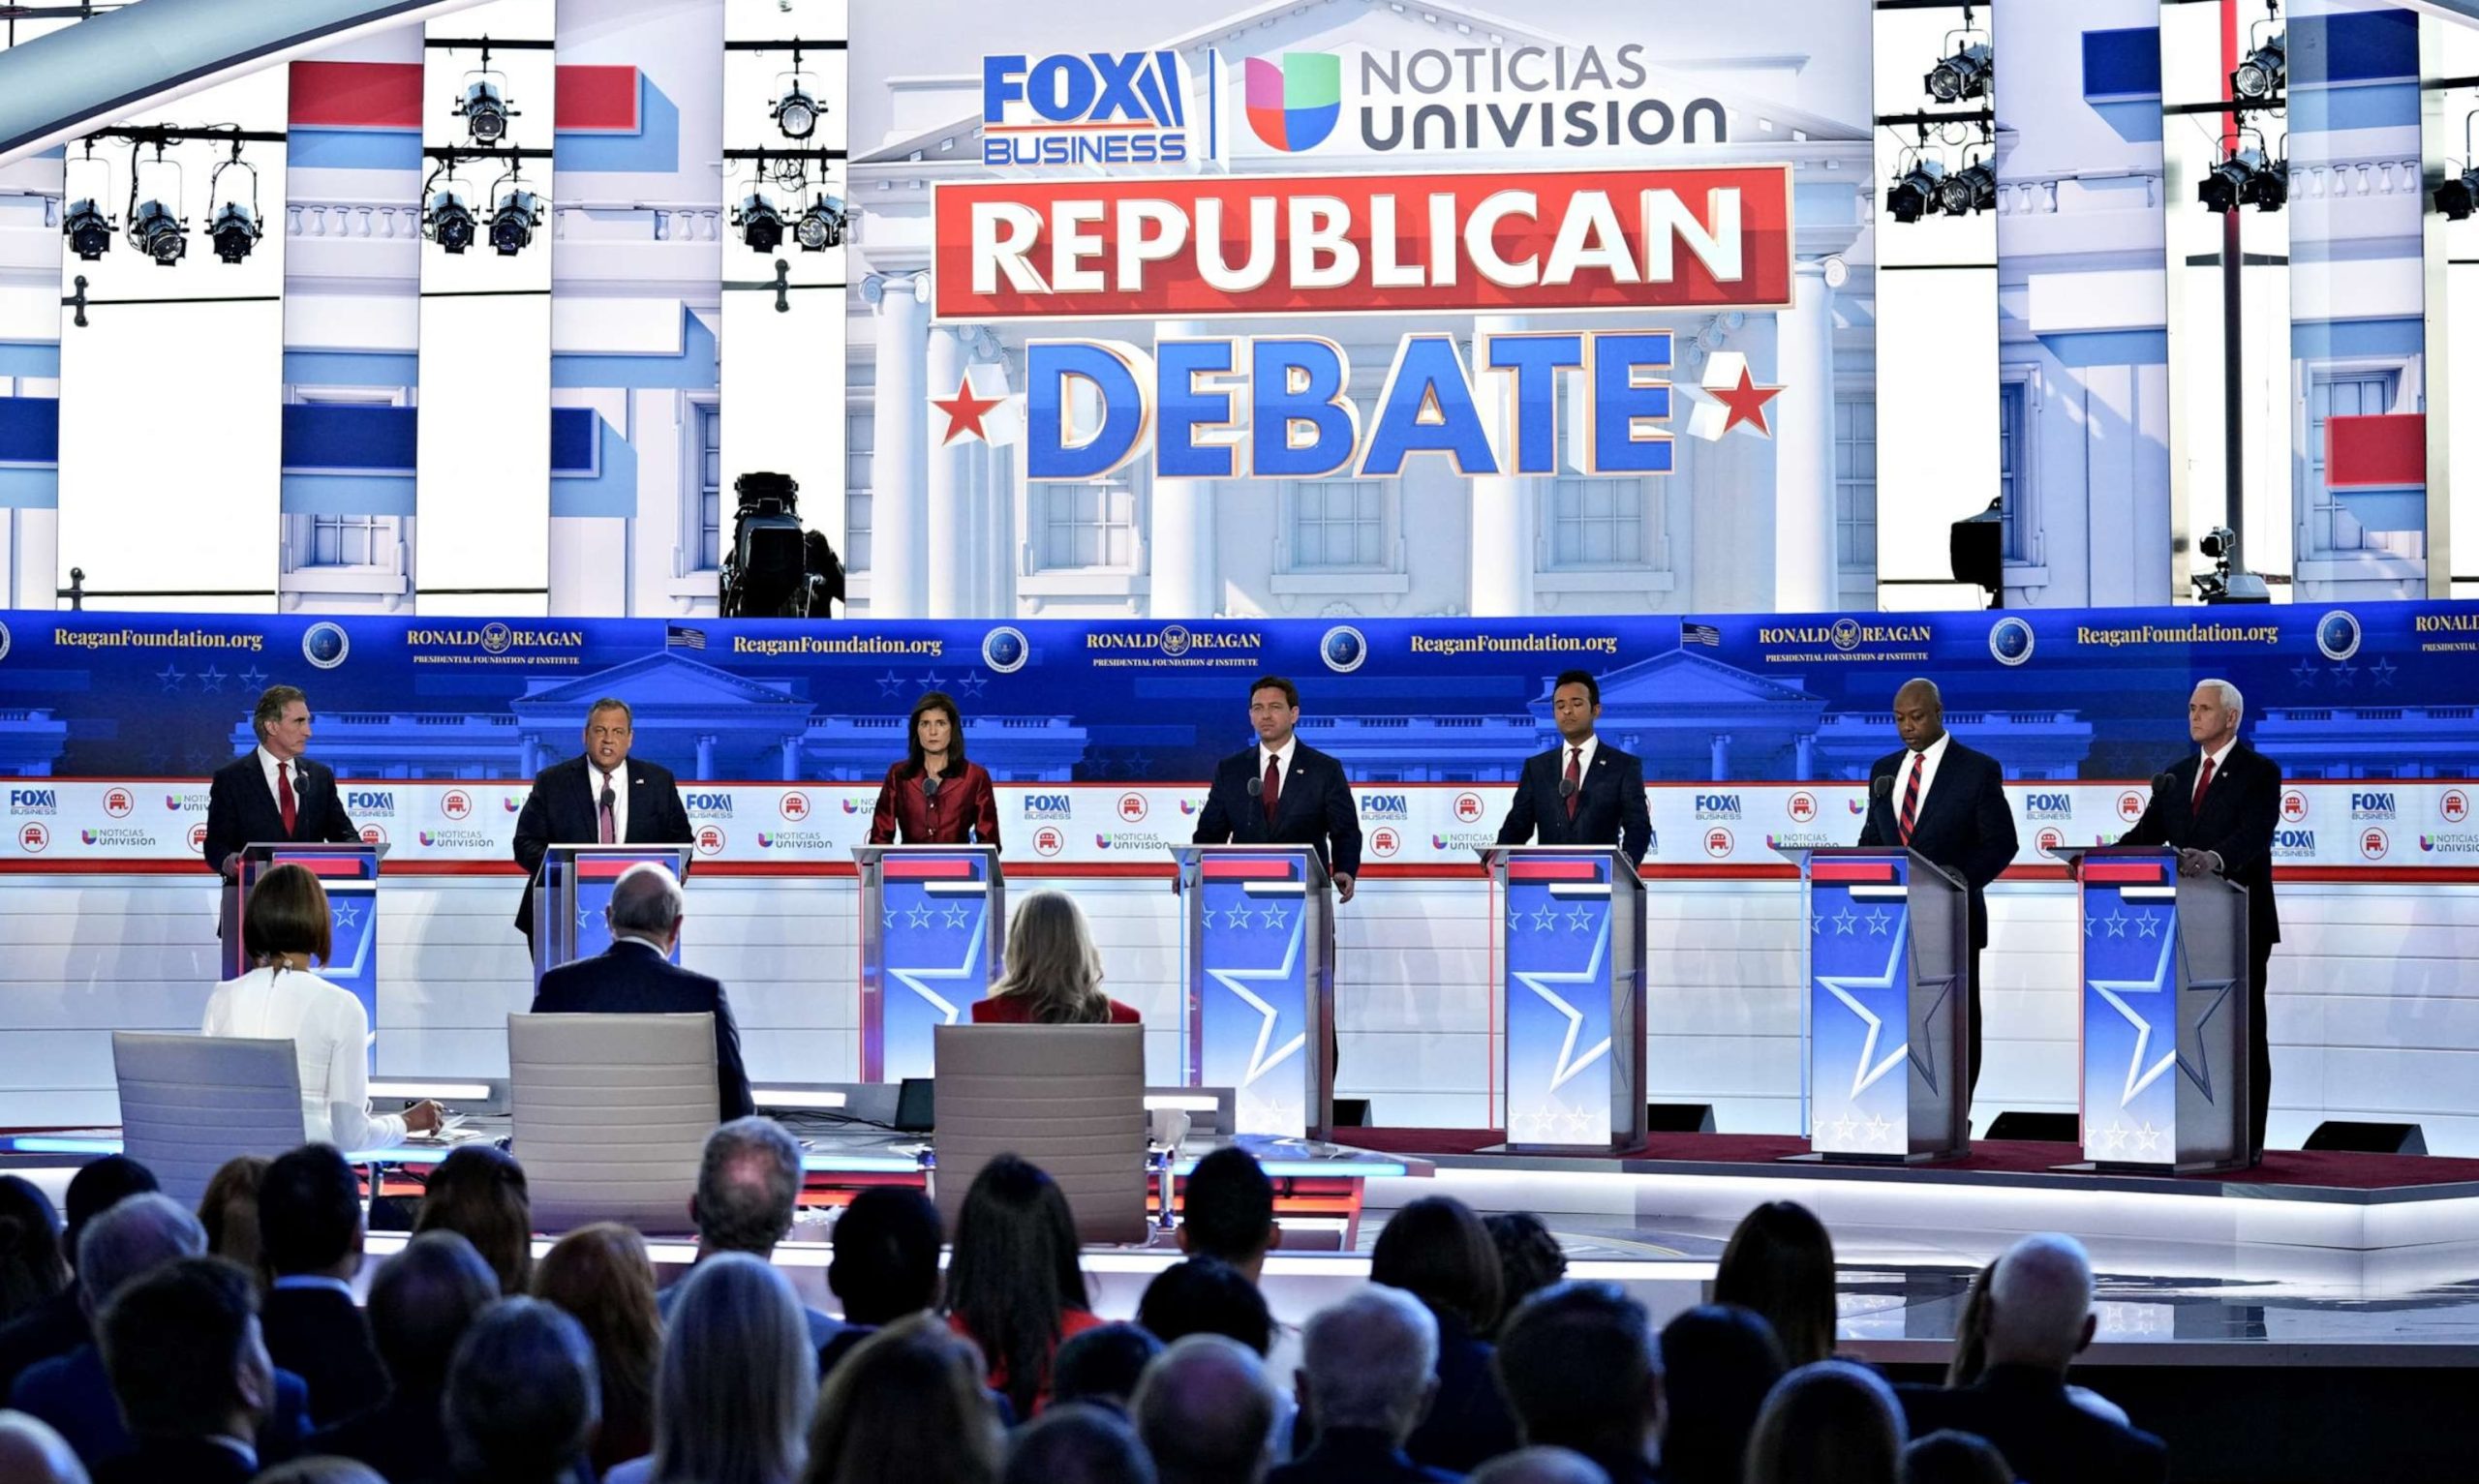 Examining the Noteworthy Moments of the Republican Debate: Insights on Drapes and China